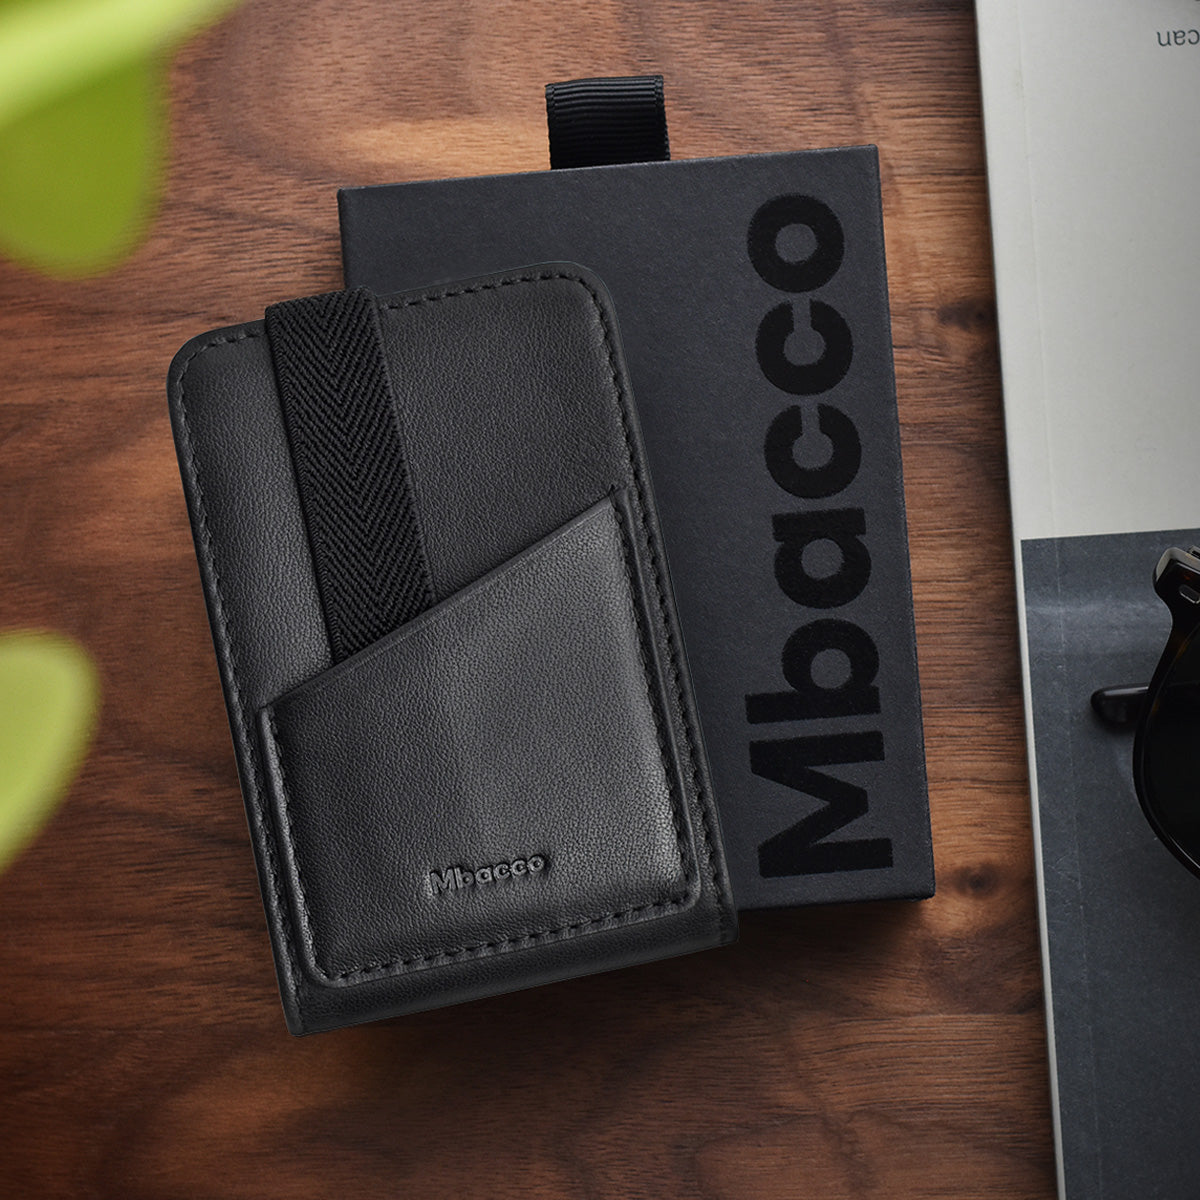 Mbacco™ Wallet